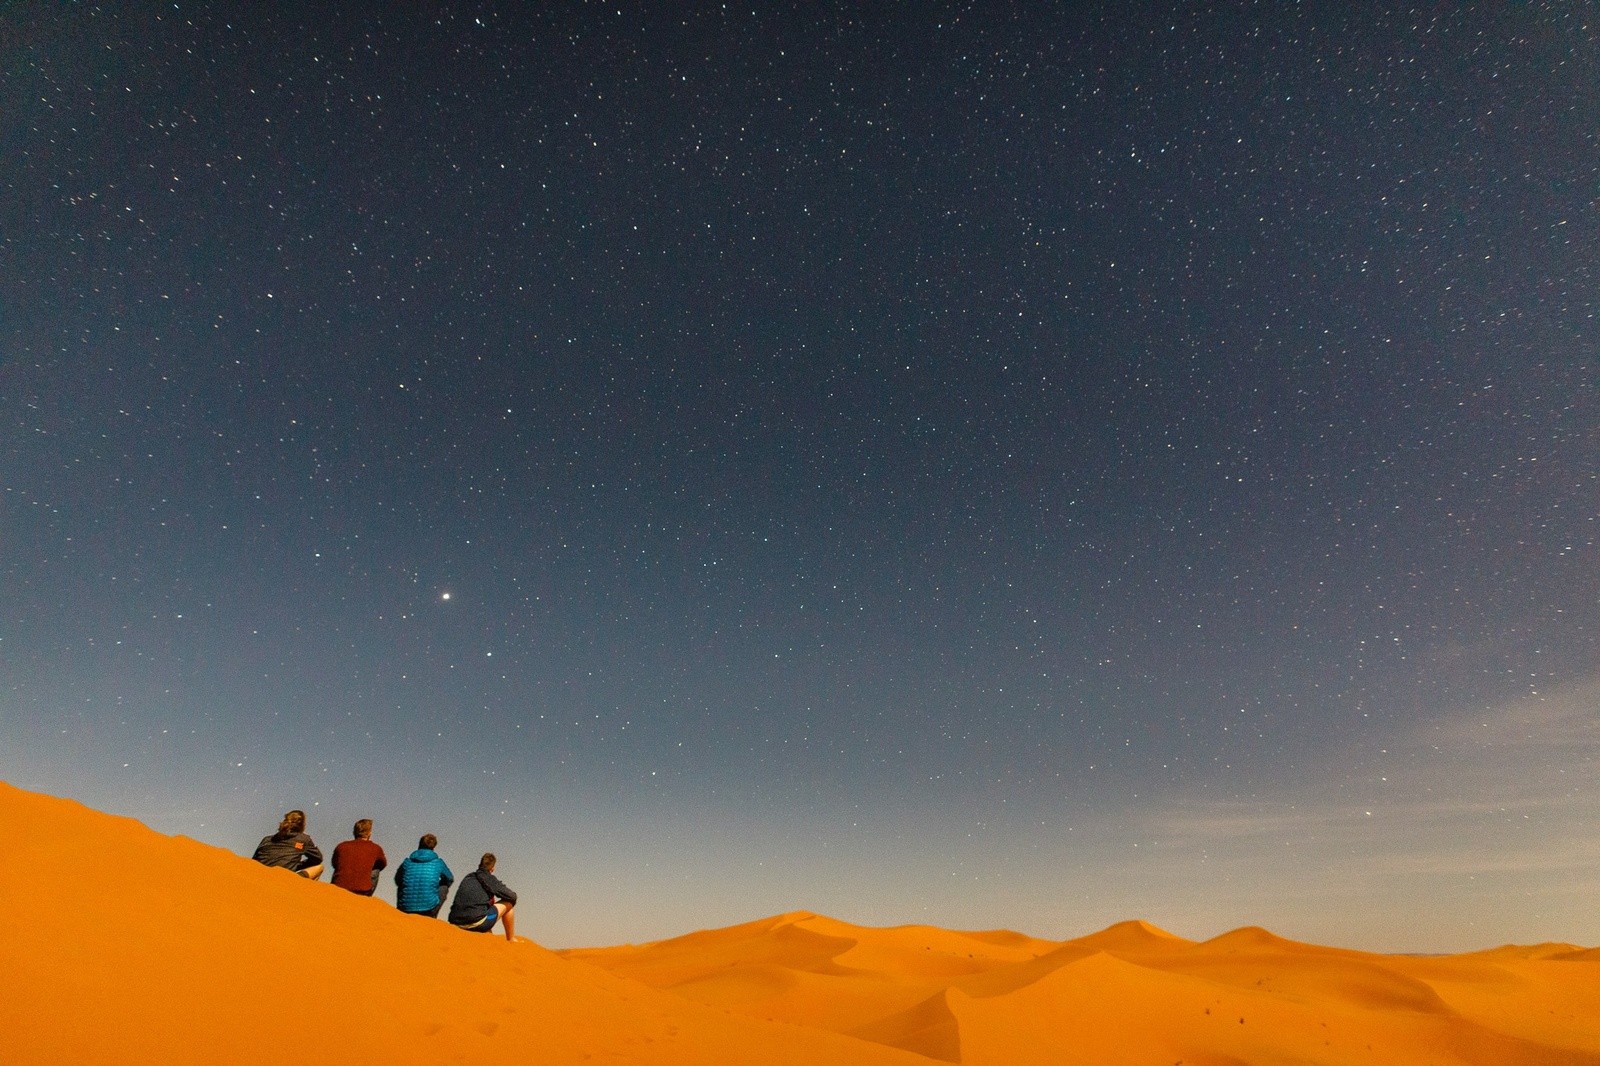 Sitting on sand dunes in Morocco